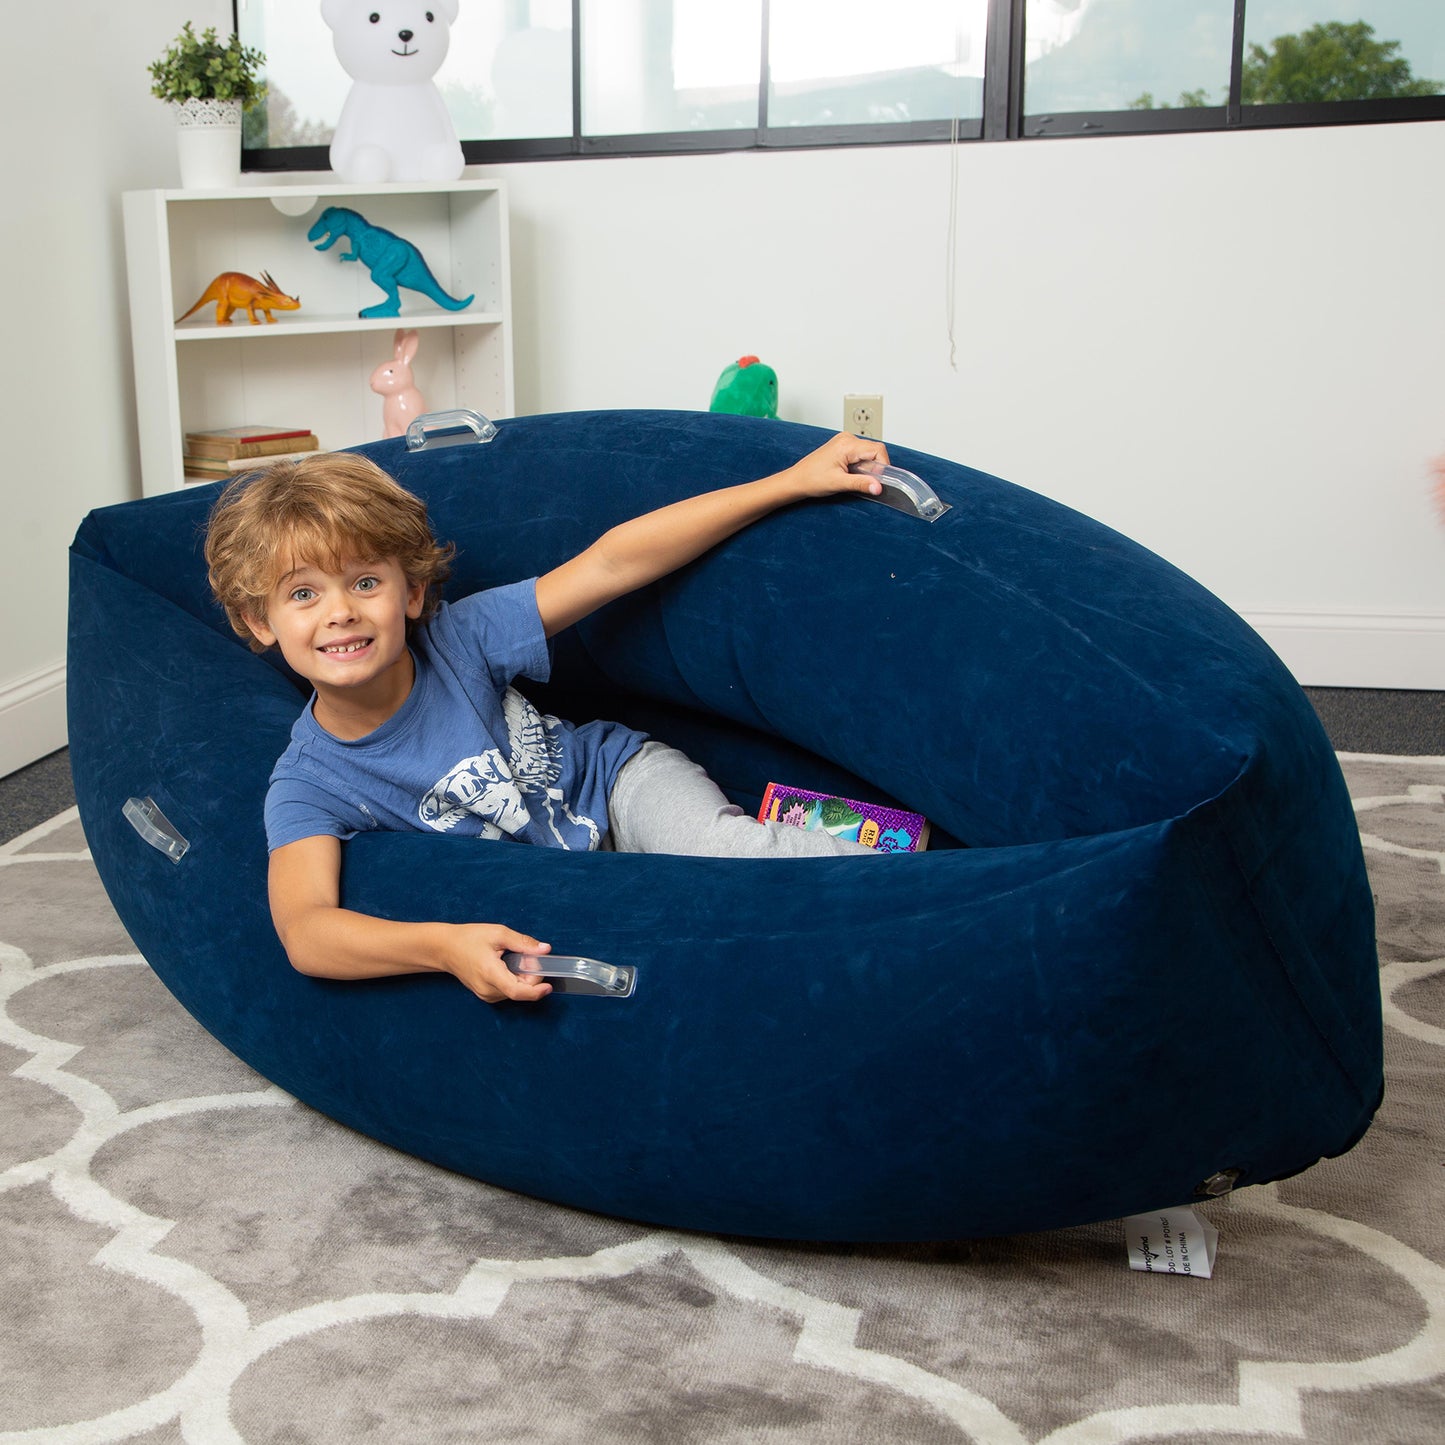 Comfy Hugging Peapod Sensory Pod, 48", Ages 3-6 Up to 4 Feet Tall, Blue